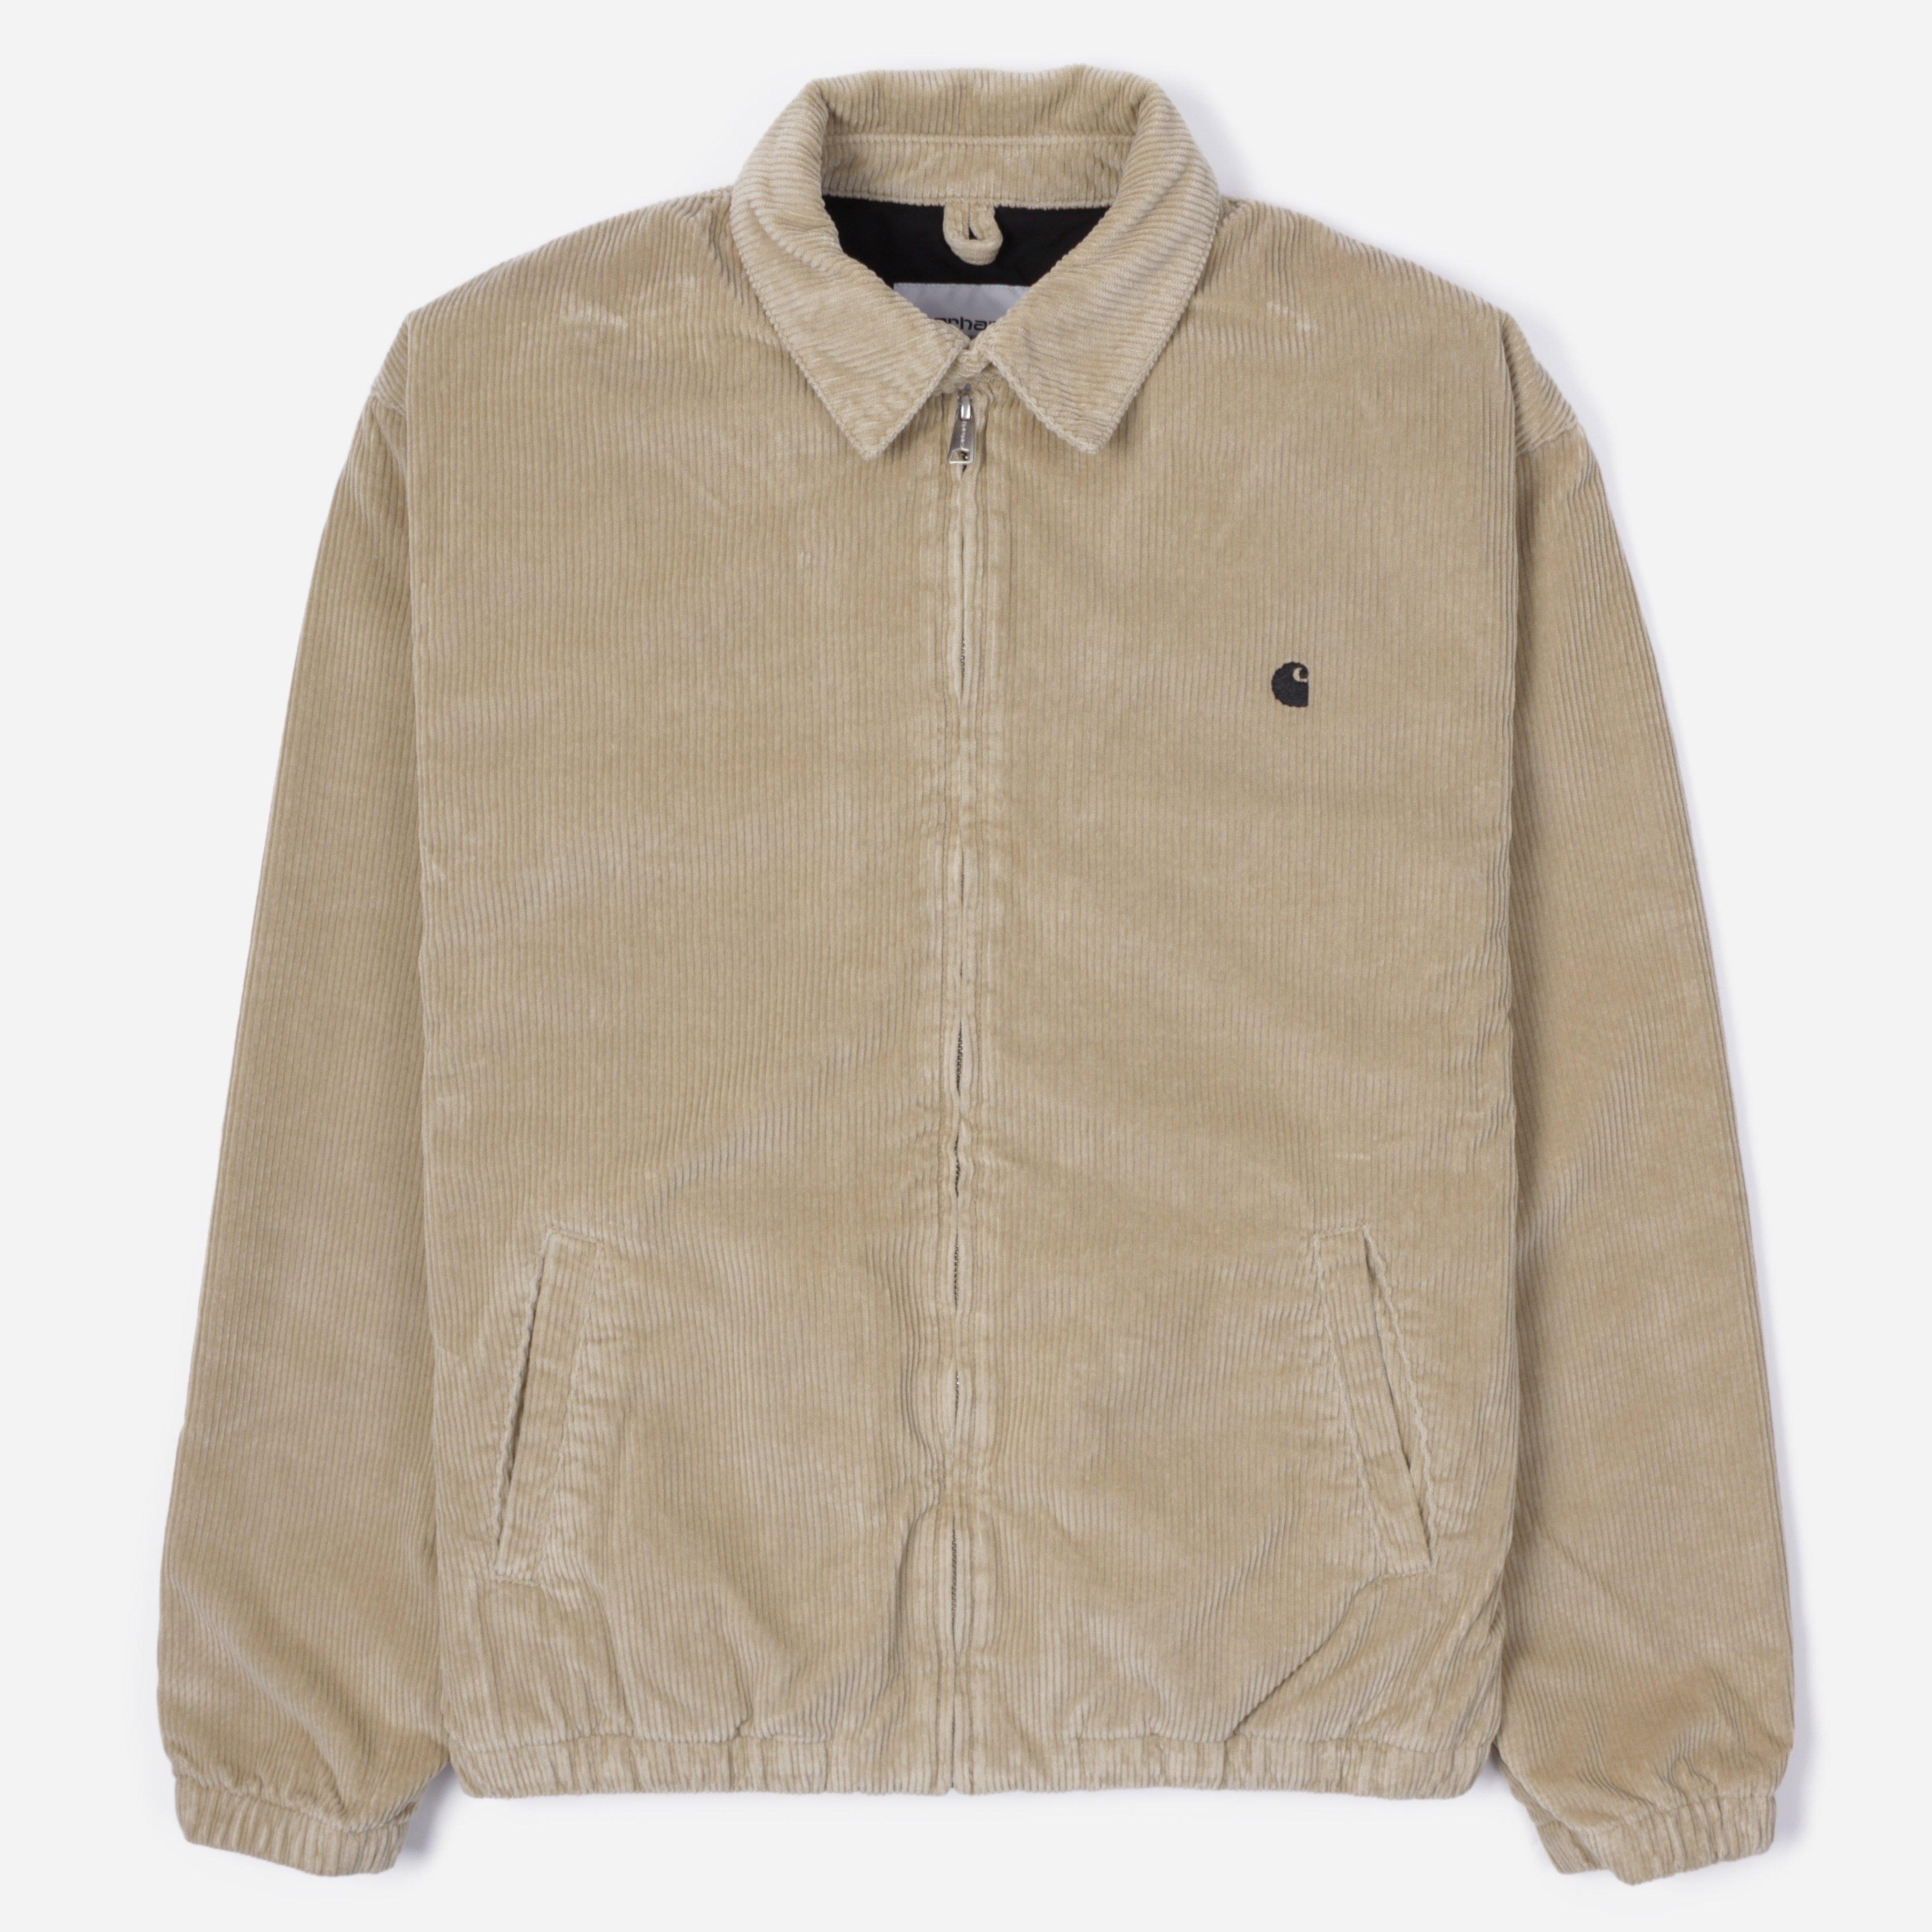 Carhartt WIP Madison Jacket in Beige (Natural) for Men - Lyst